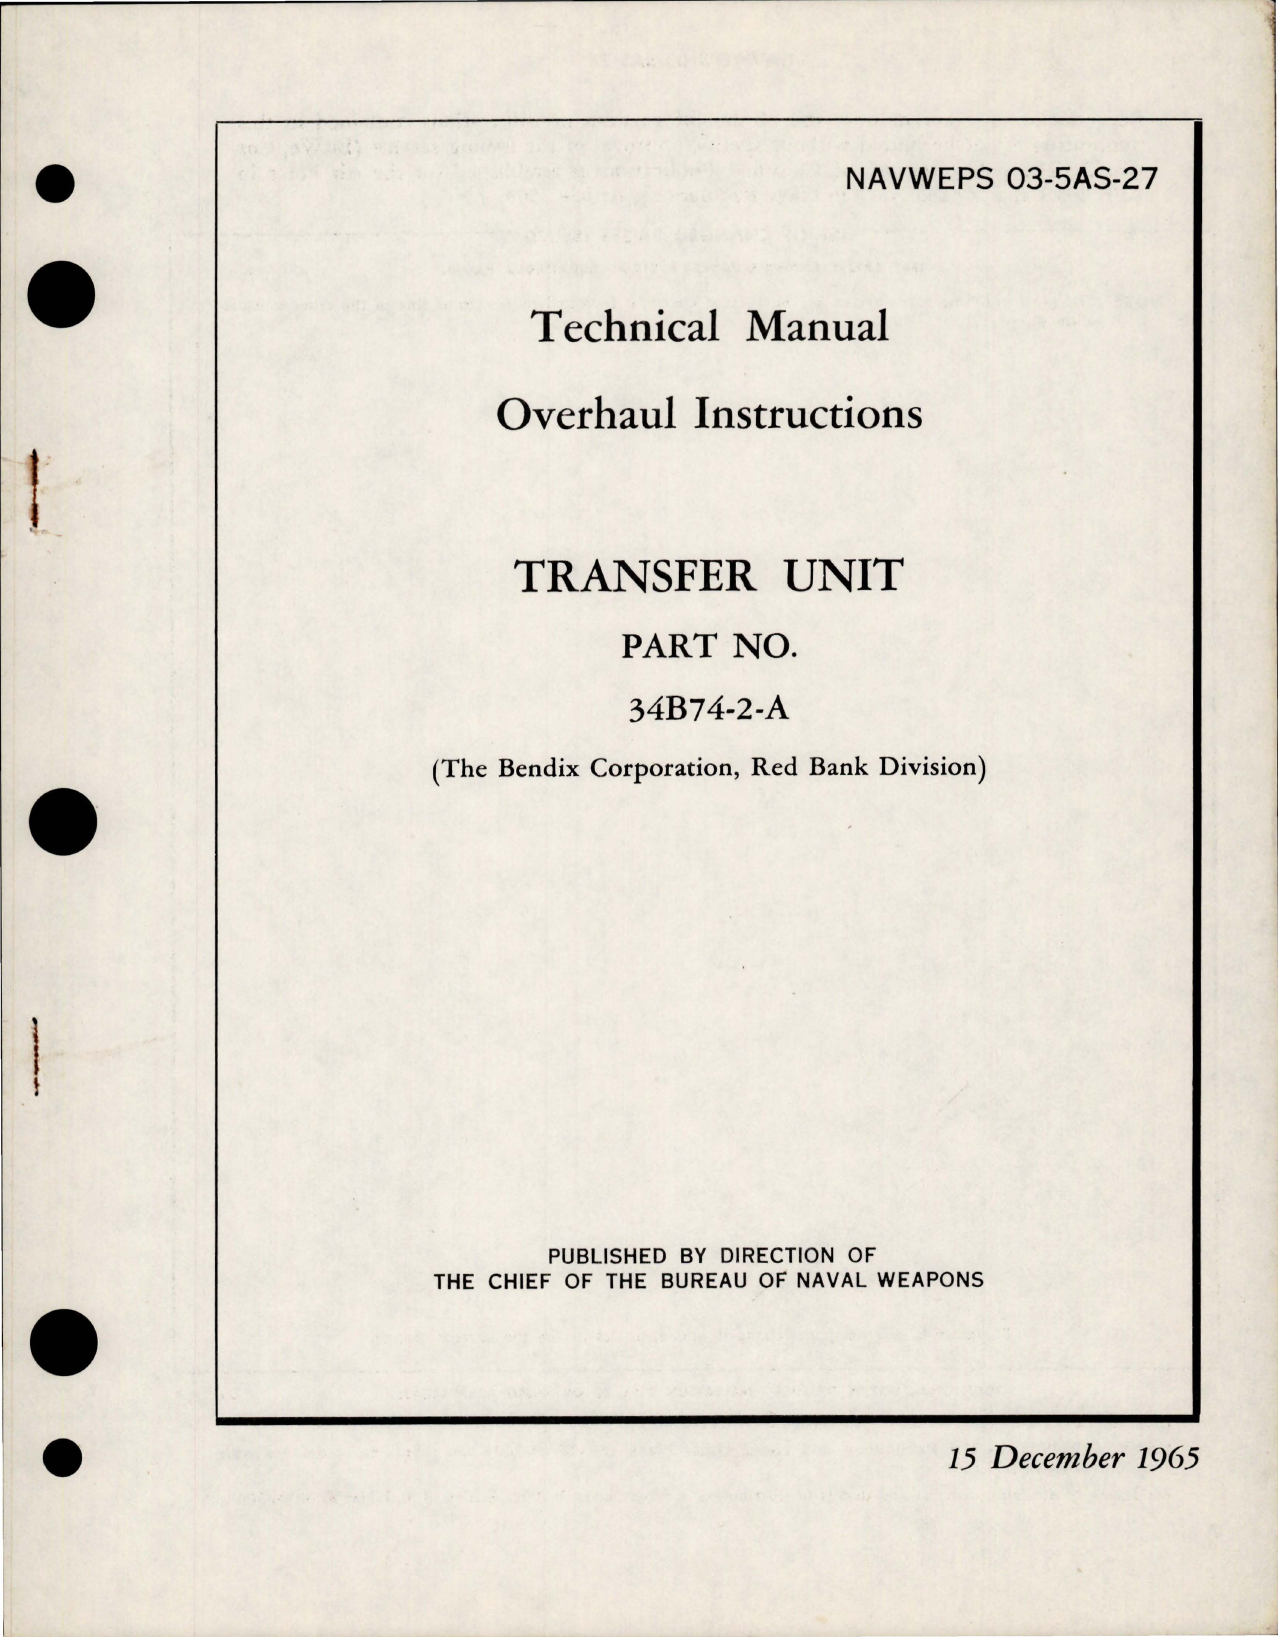 Sample page 1 from AirCorps Library document: Overhaul Instructions for Transfer Unit - Part 34B74-2-A 